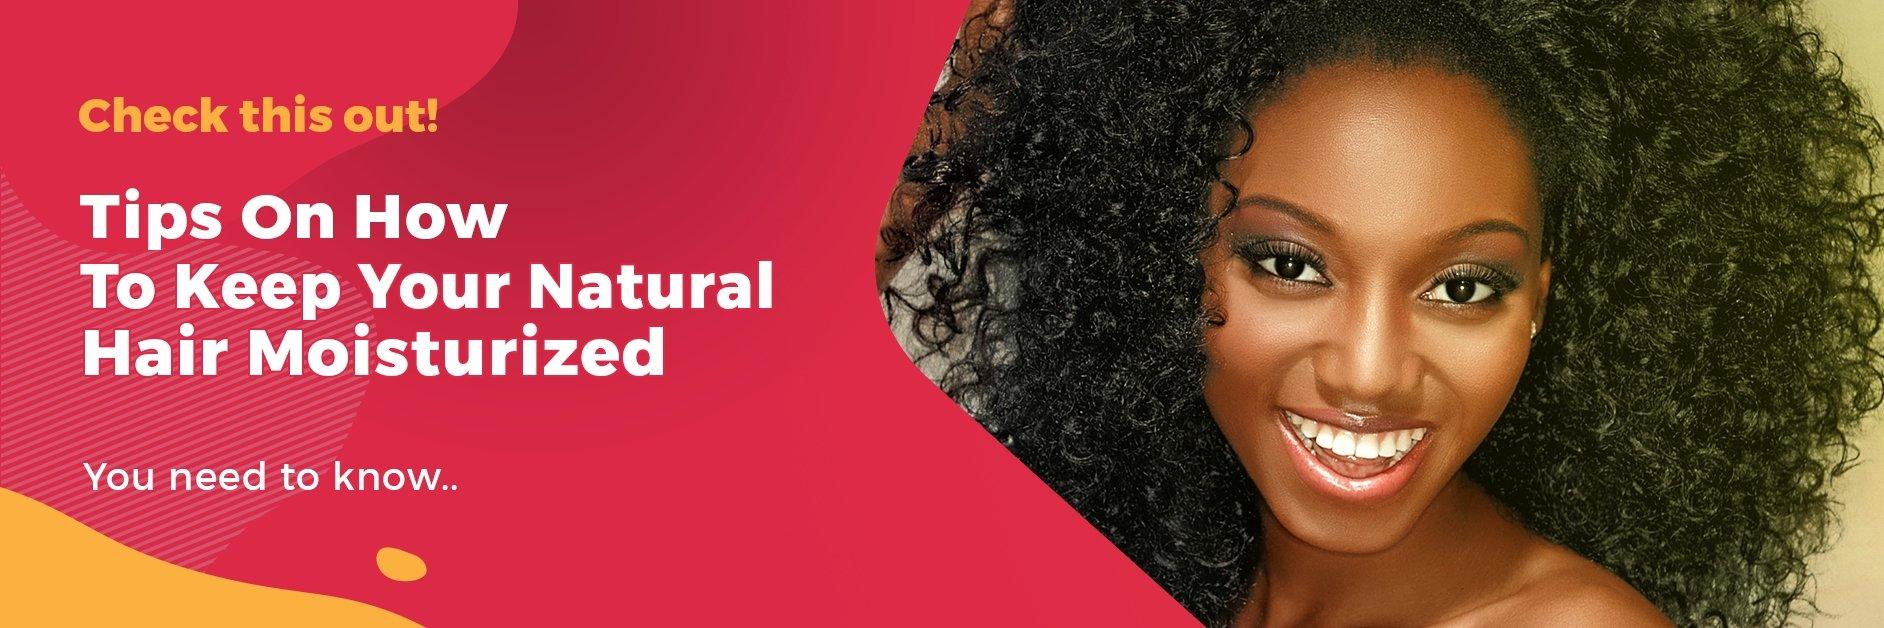 TIPS ON HOW TO KEEP YOUR NATURAL HAIR MOISTURIZED - GlammedNaturallyOil